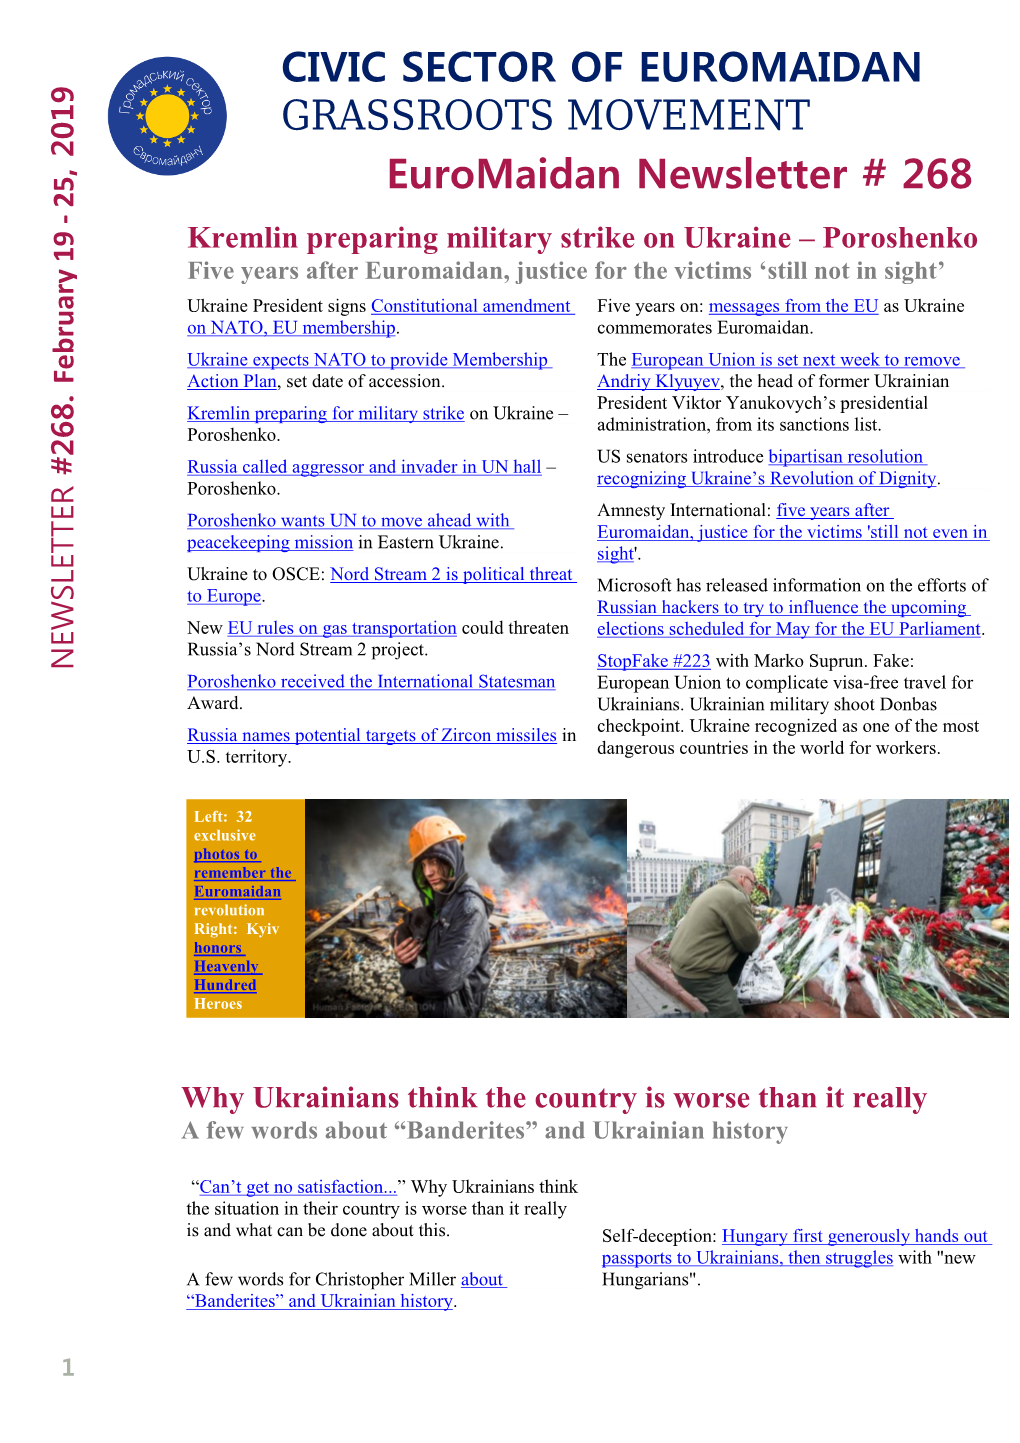 Euromaidan Newsletter # 268 CIVIC SECTOR OF